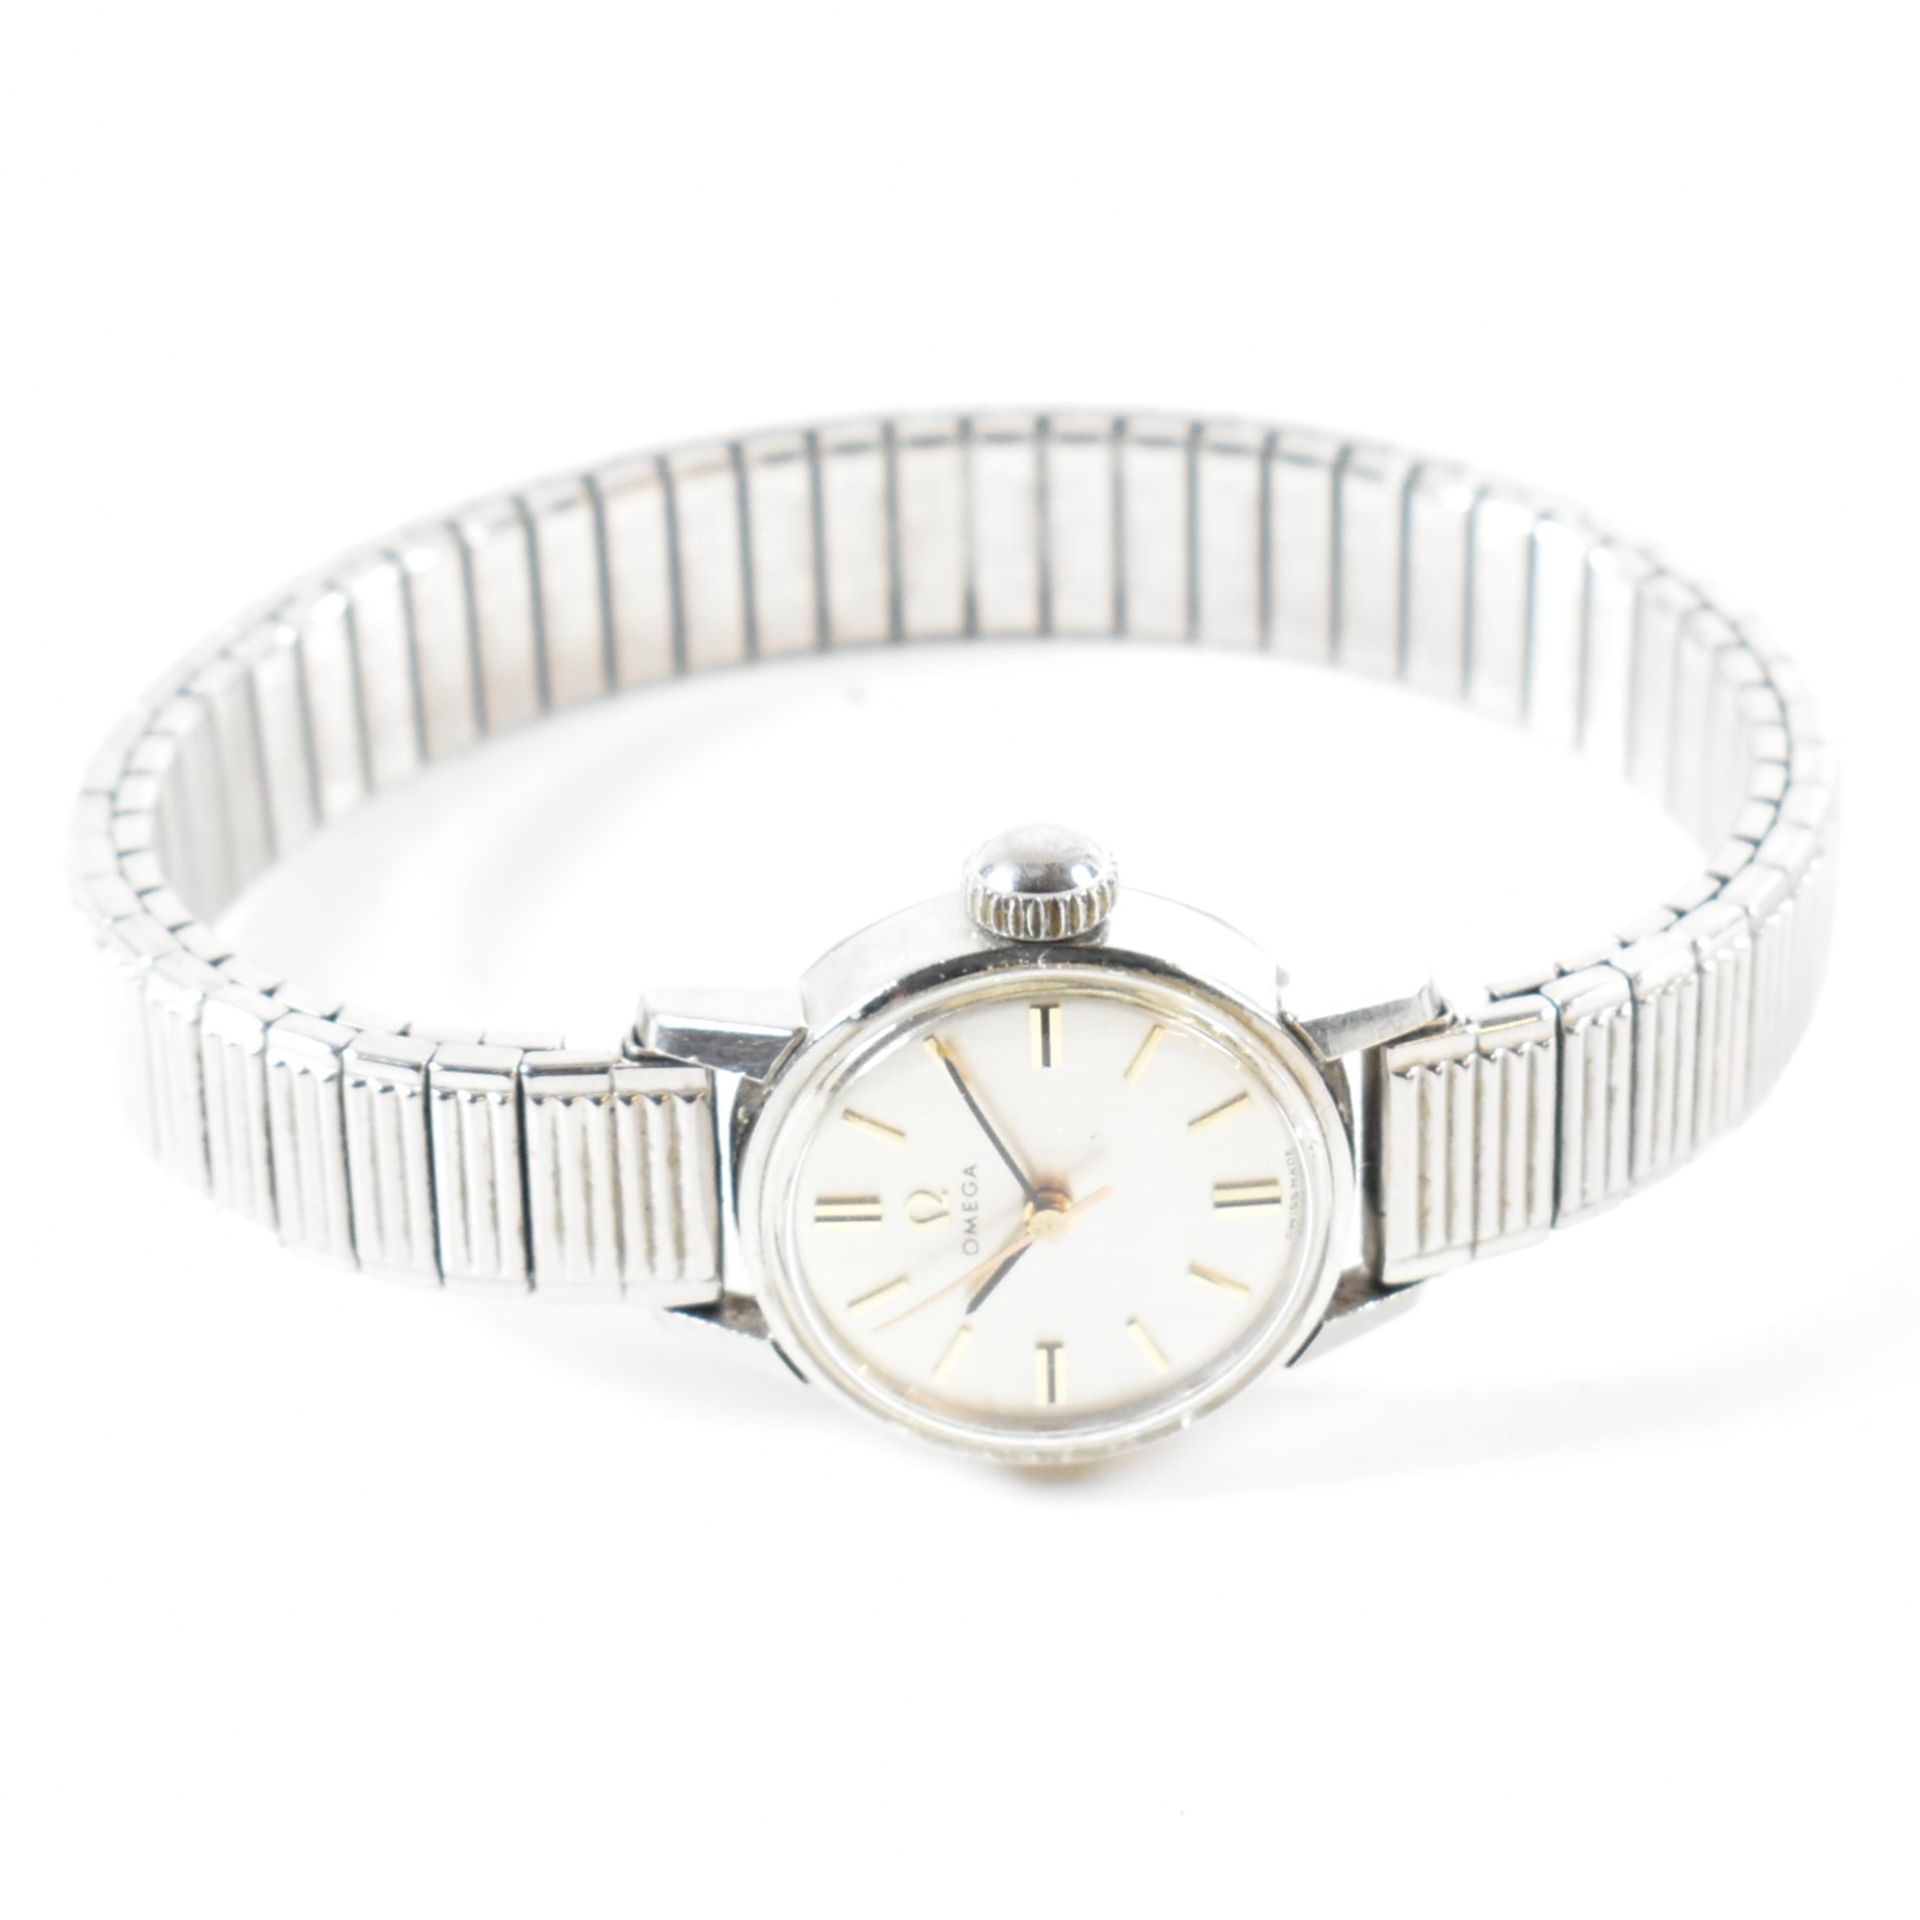 CASED STAINLESS STEEL OMEGA SEAMASTER LADIES WRISTWATCH - Image 3 of 4